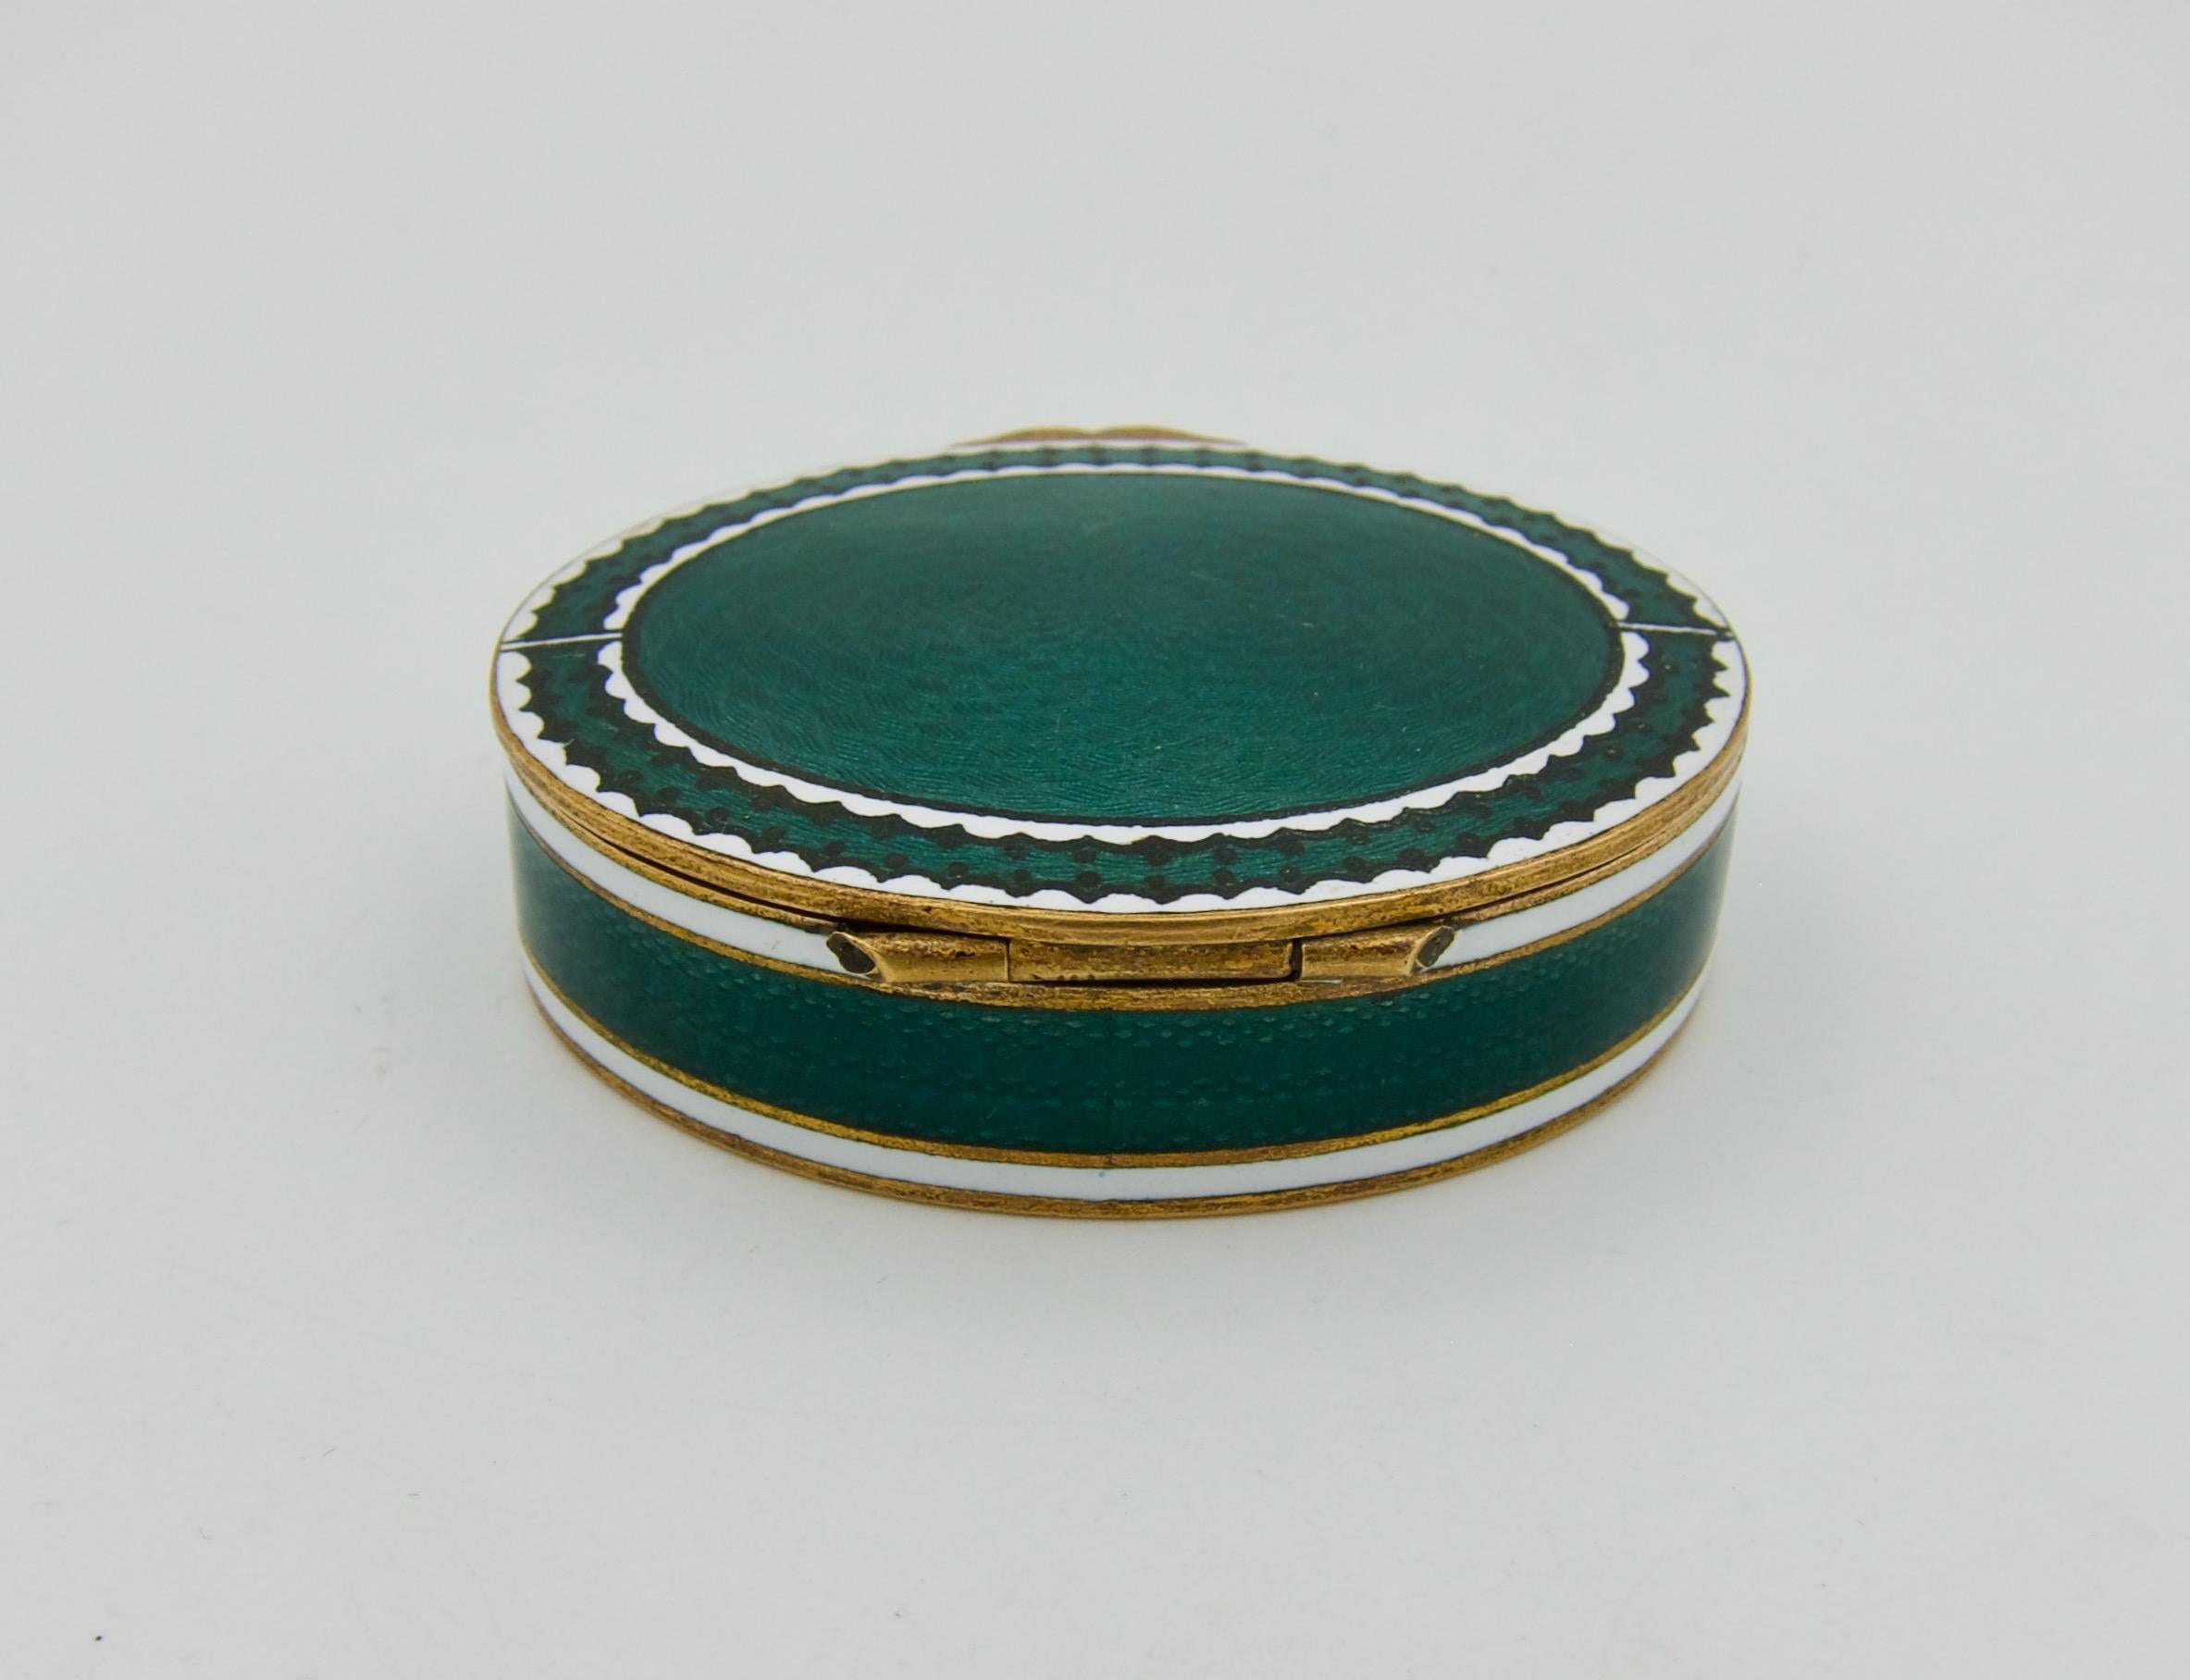 Edwardian Antique Gilt Metal and Guilloche Enamel Snuff or Pill Box